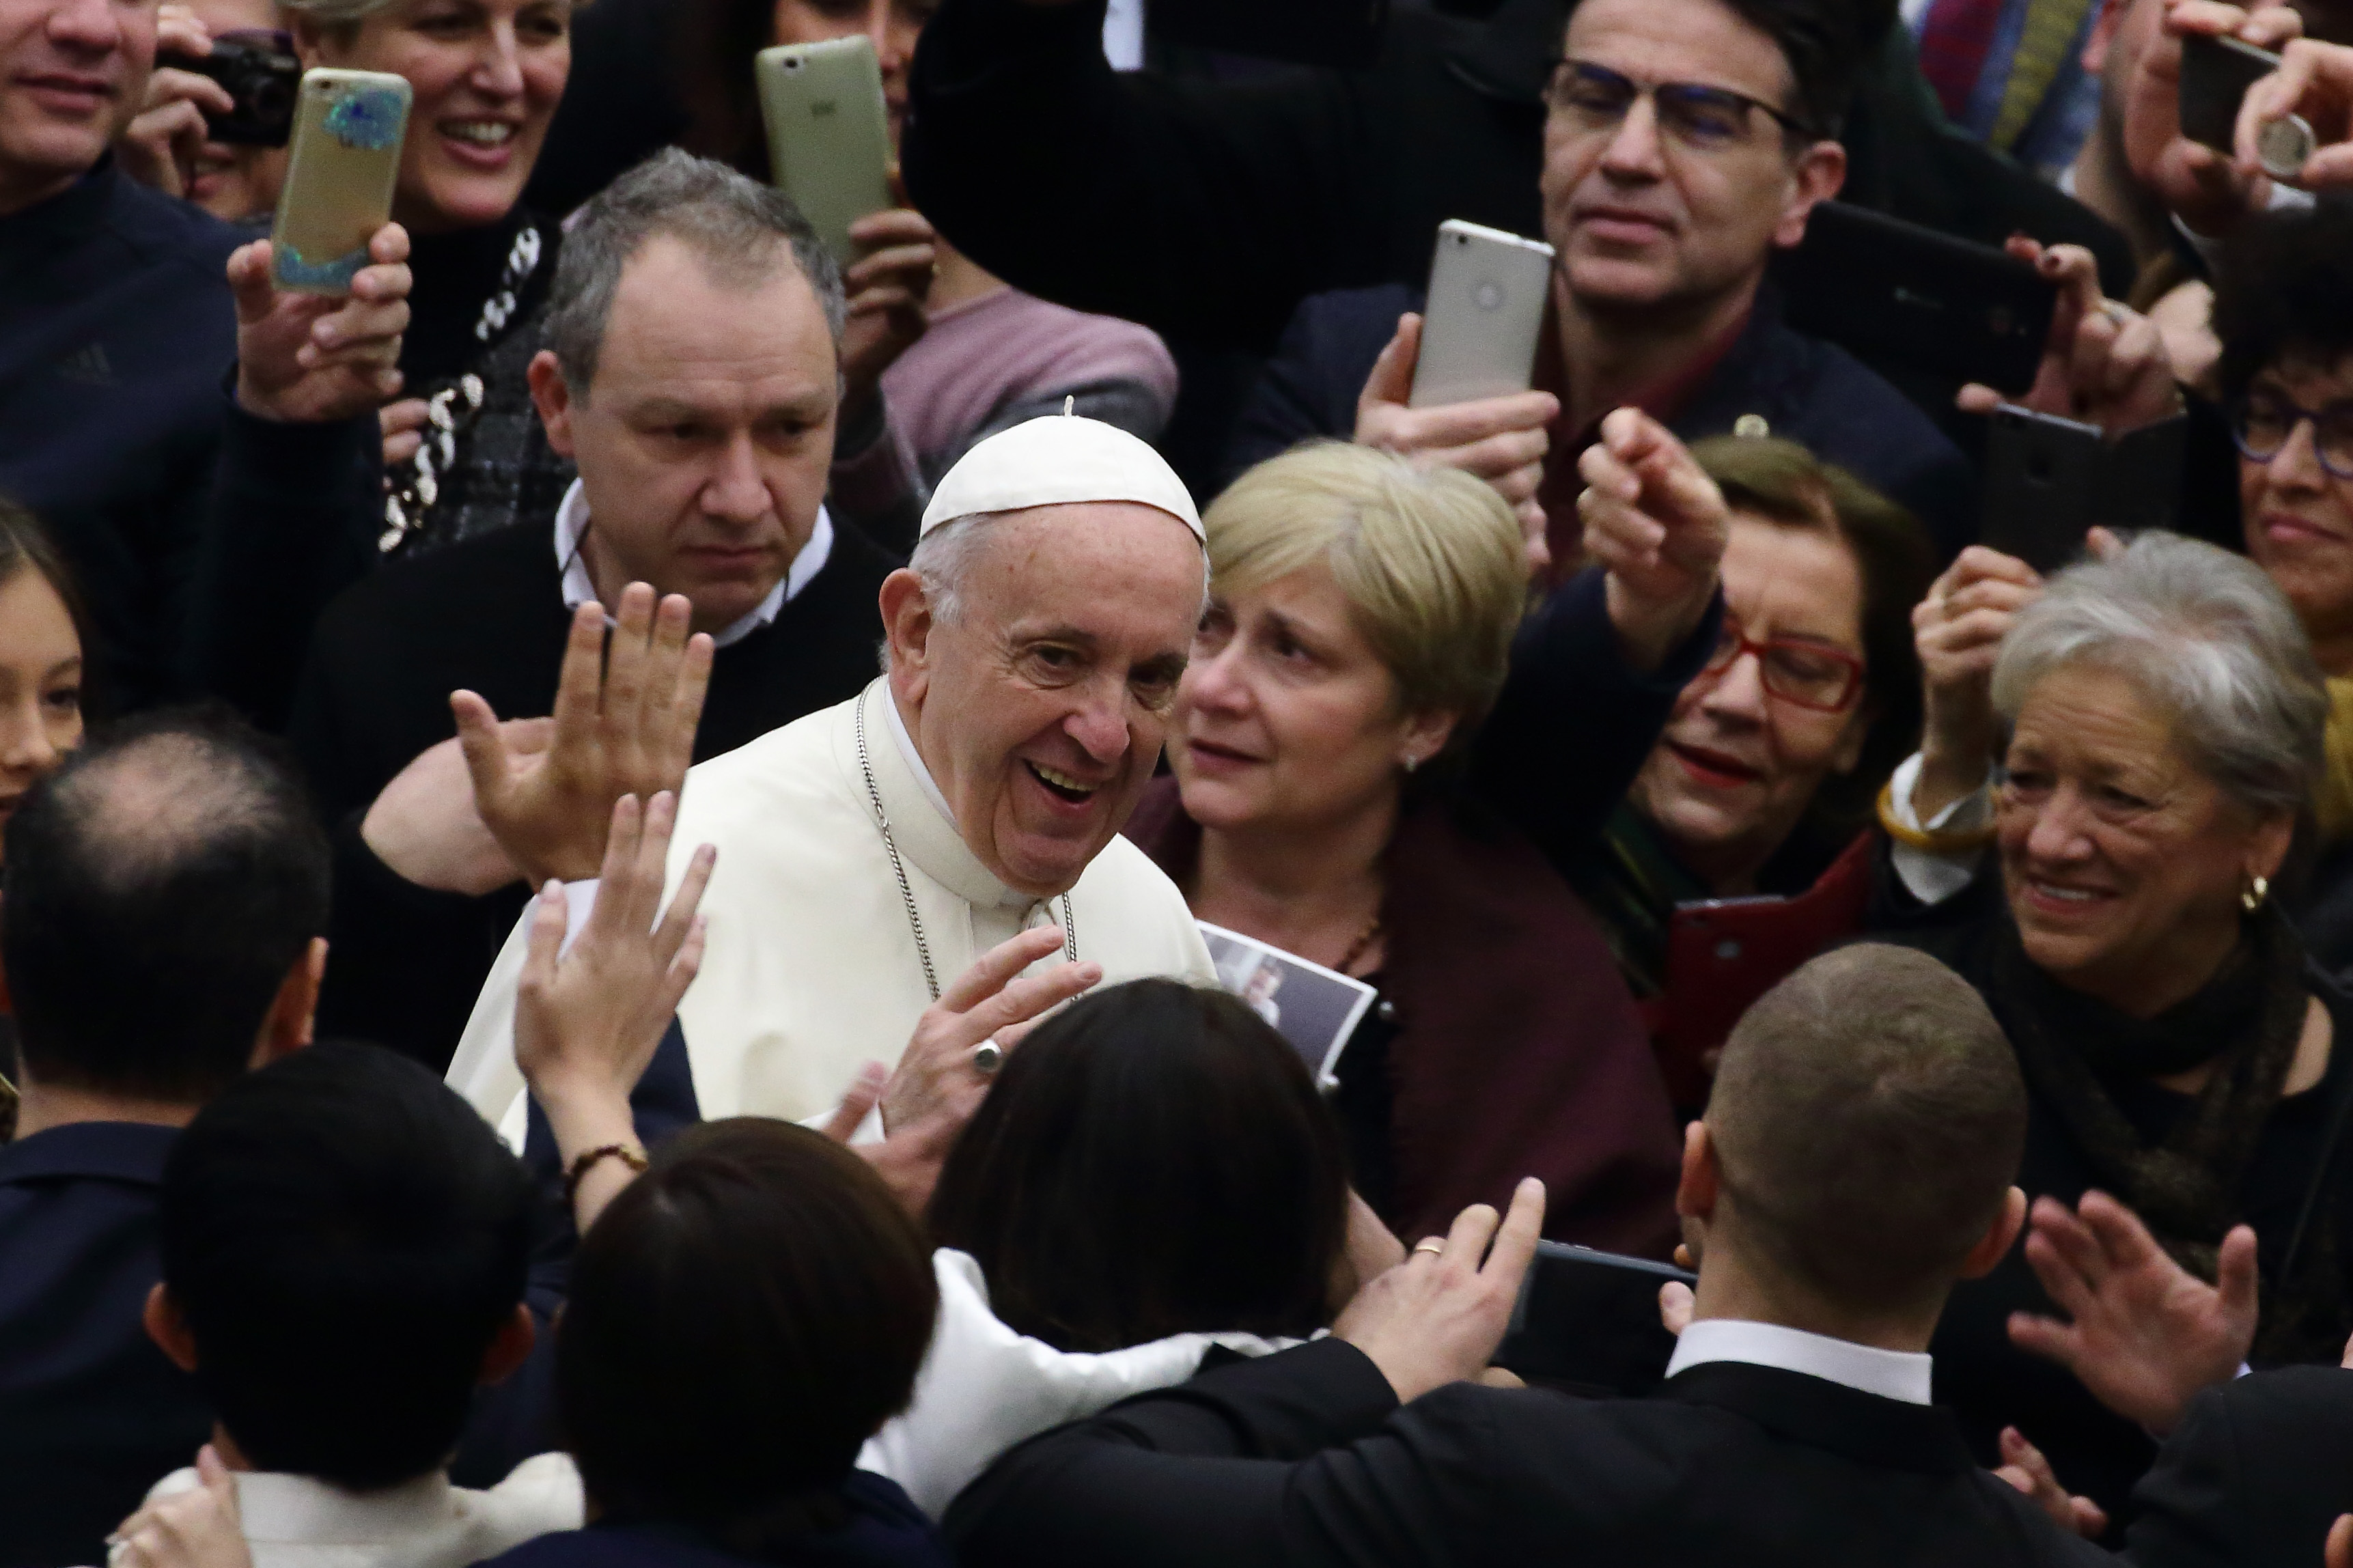 Most US Catholics still view Pope Francis favourably